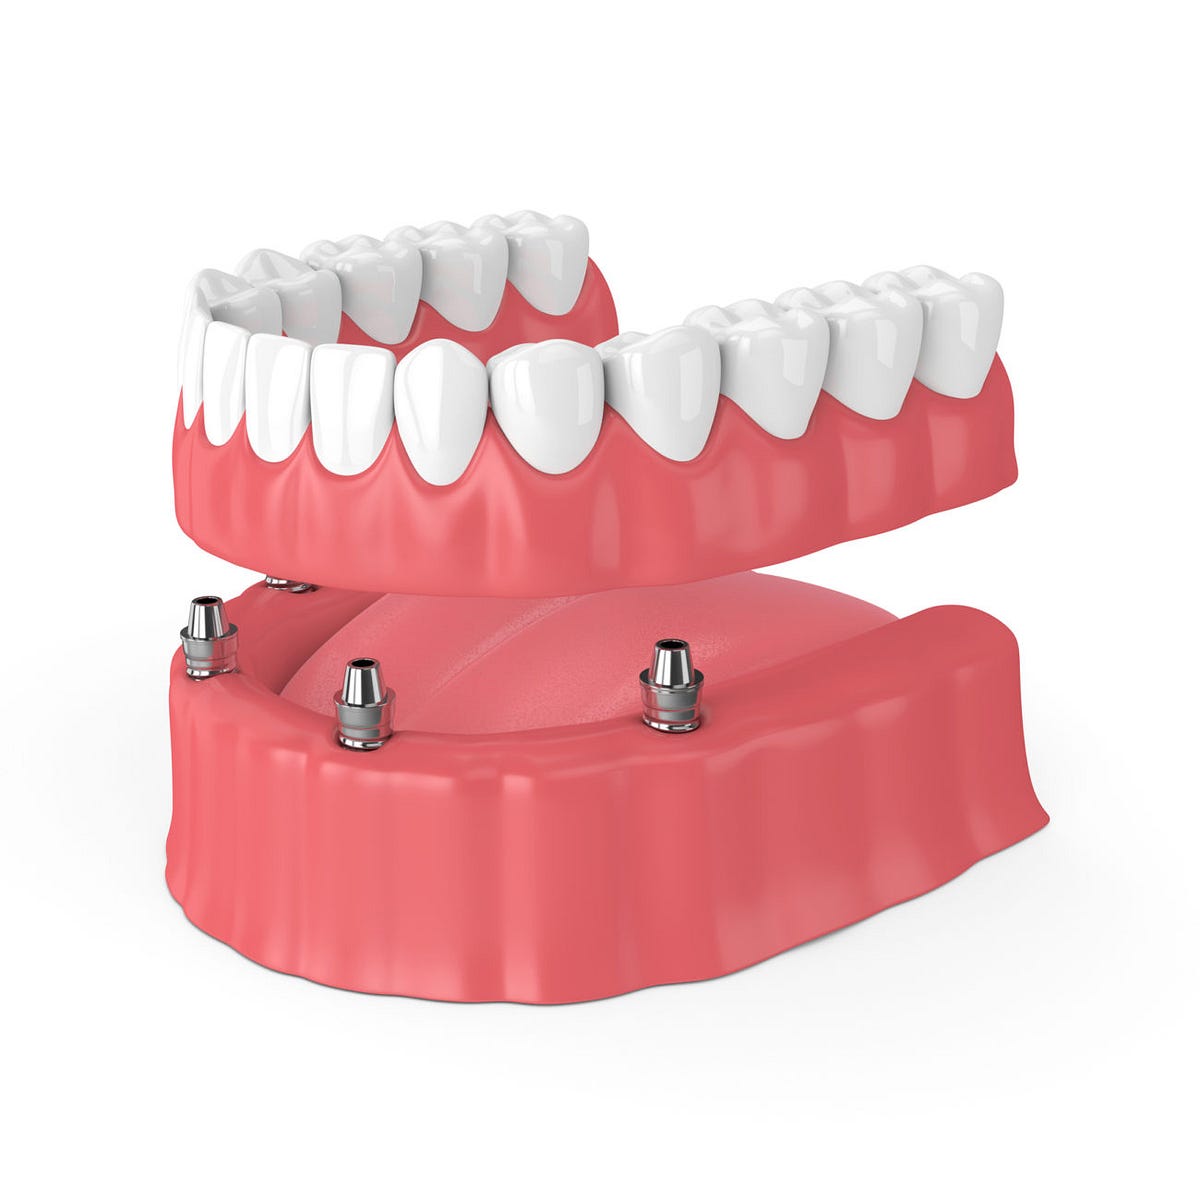 Can Dental Implants Improve Your Quality of Life? Examining the Benefits